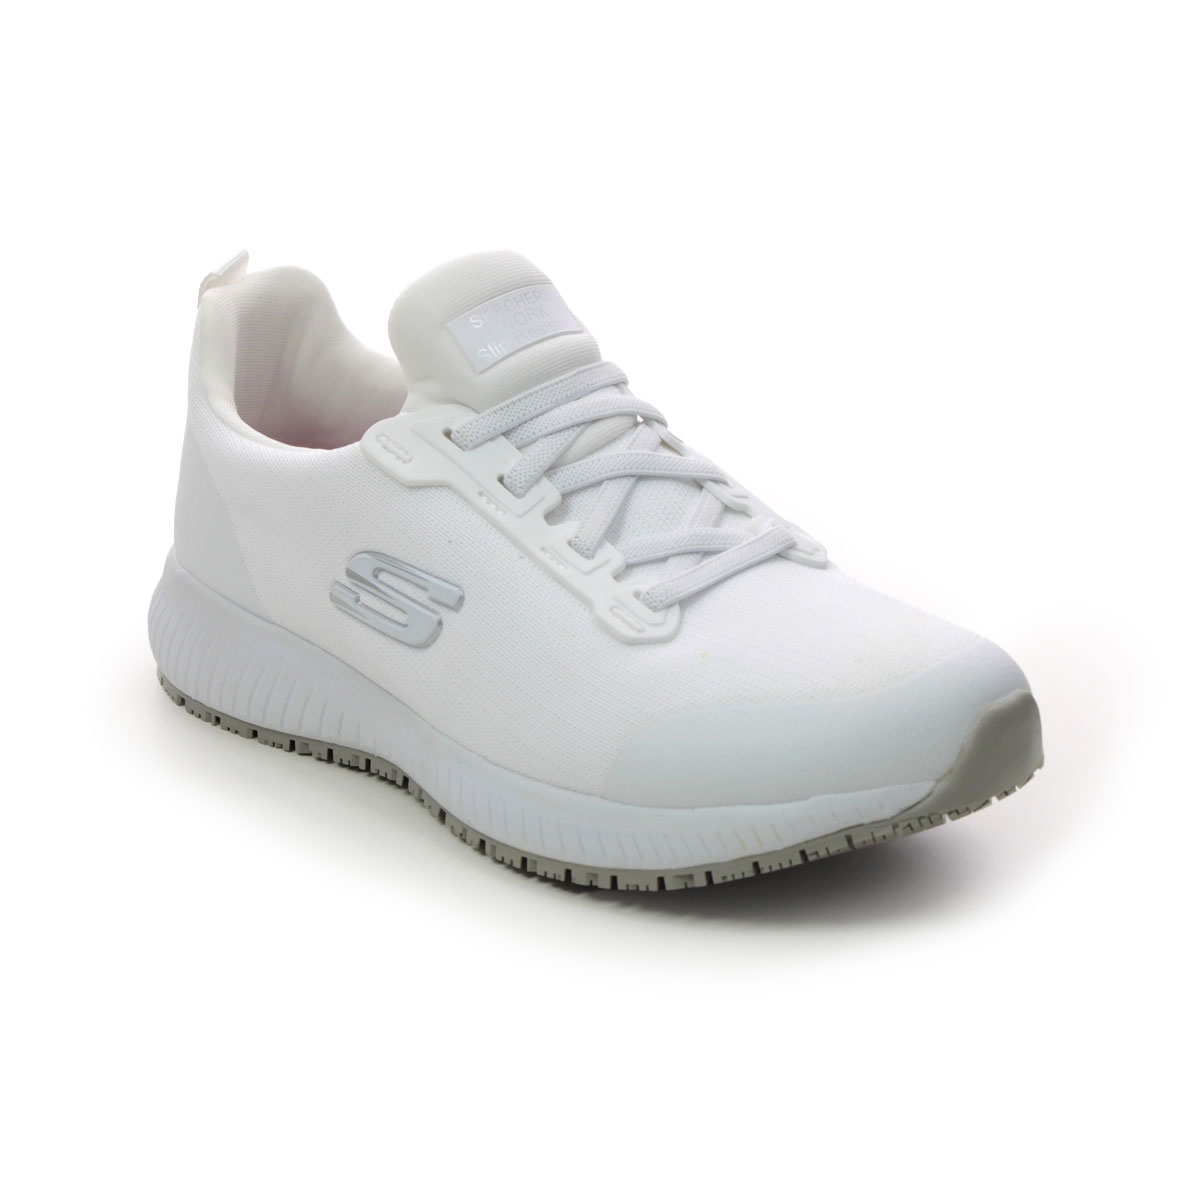 Skechers Work Squad Slip Resistant White Womens Trainers 77222Ec In Size 6 In Plain White